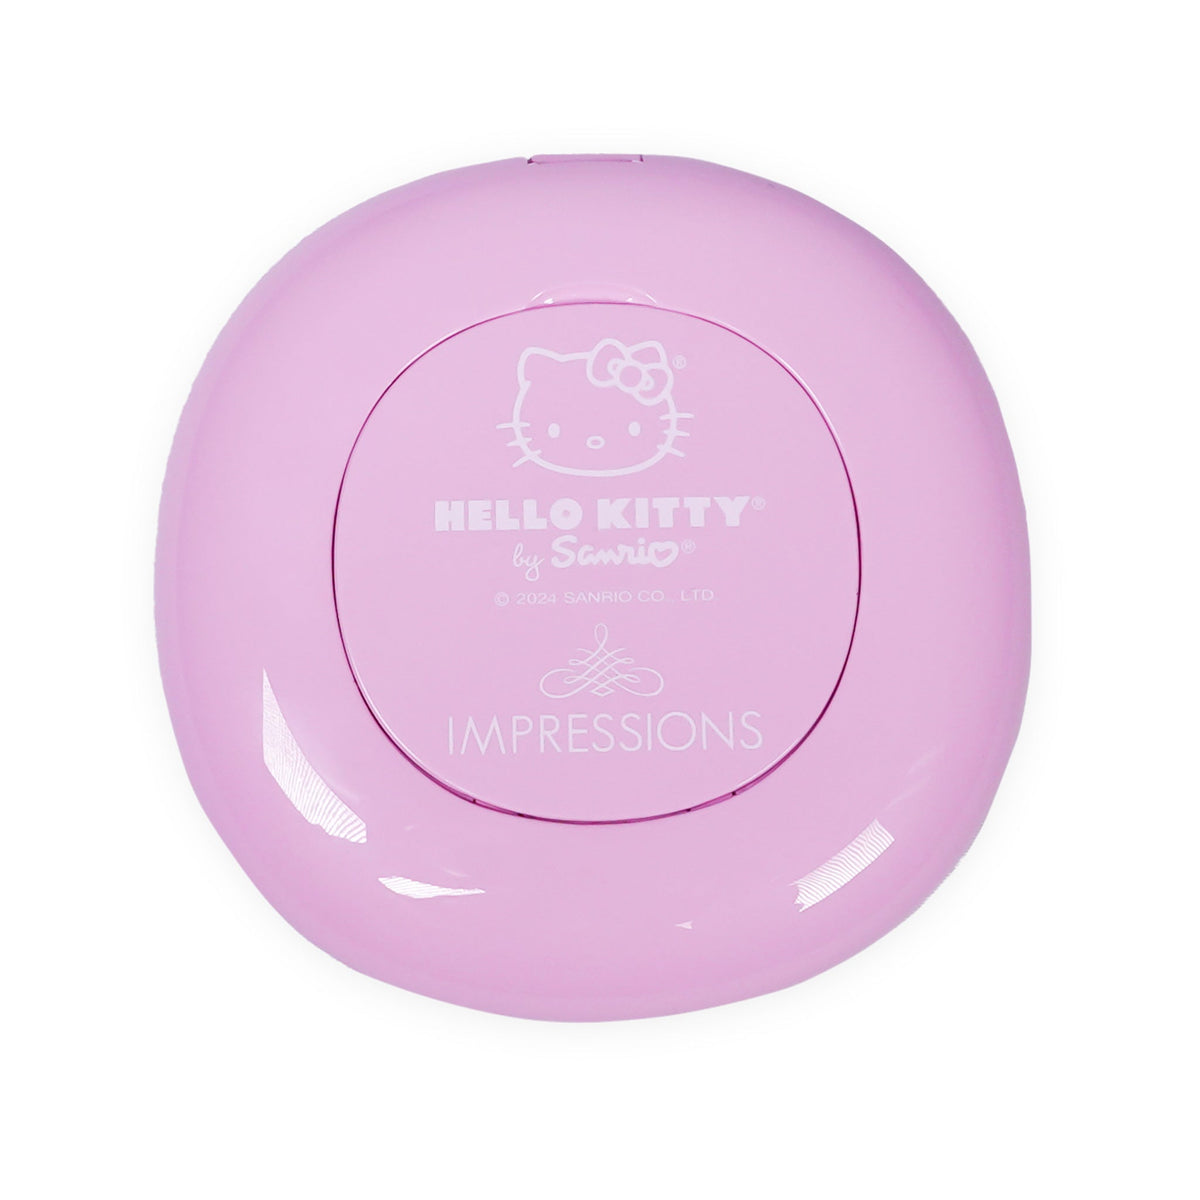 Hello Kitty x Impressions Vanity 50th Anniv. Round LED Compact Mirror Makeup Mirrors Impressions Vanity Co.   